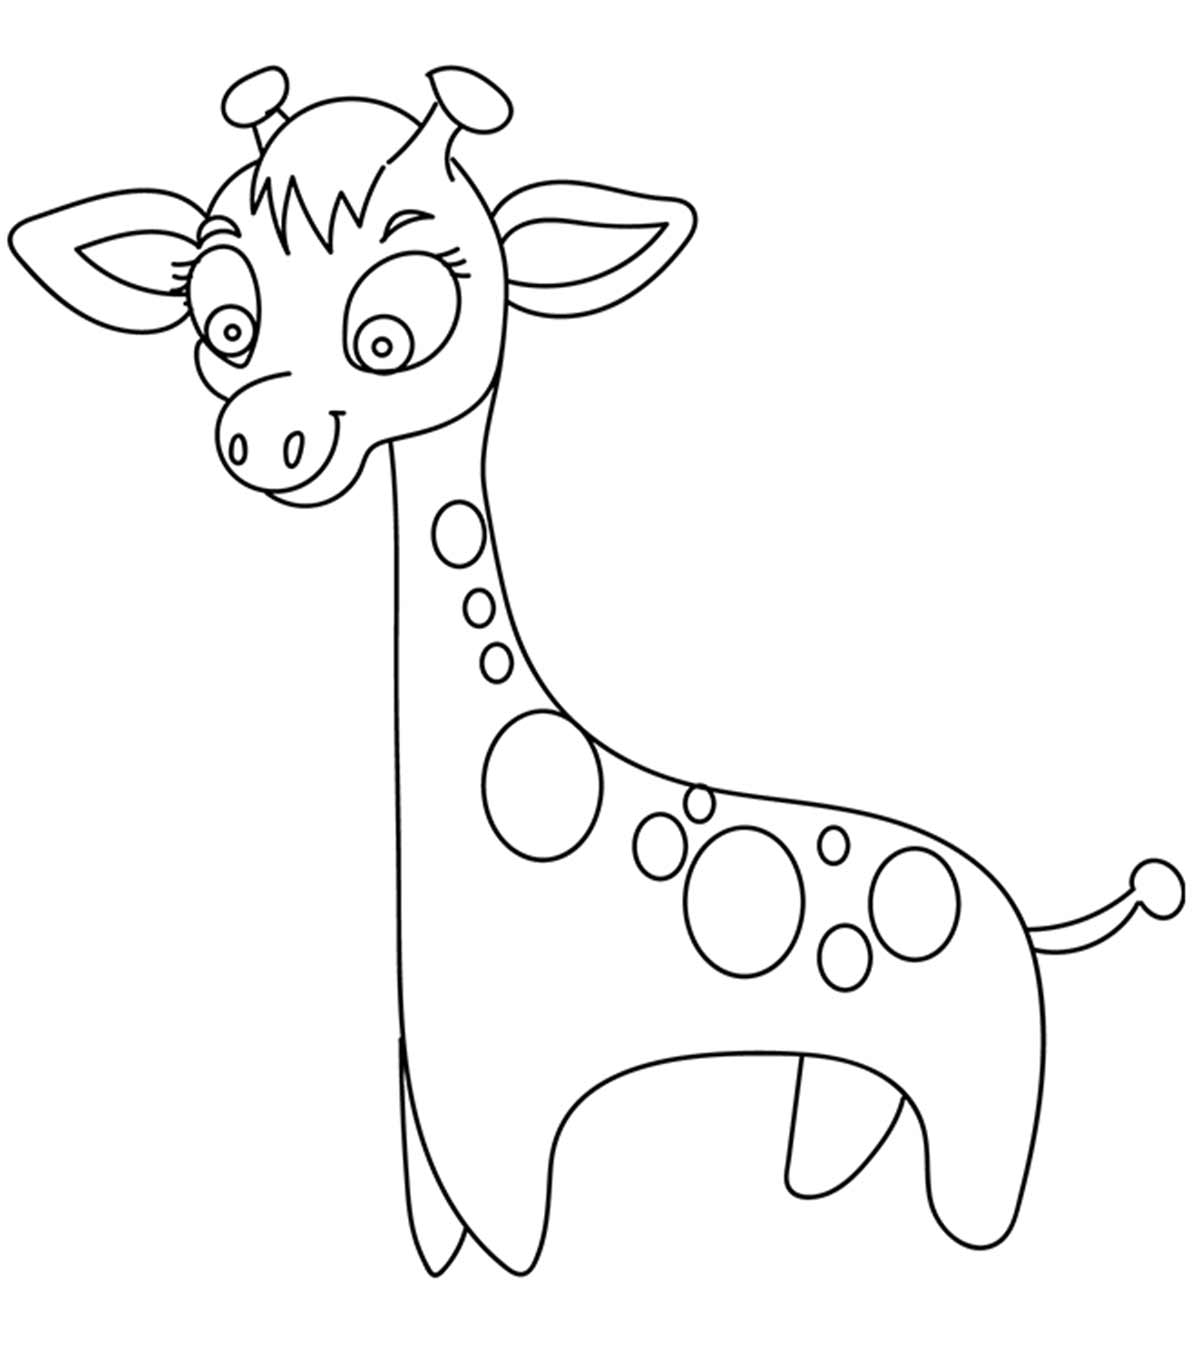 20 Cute Giraffe Coloring Pages For Your Toddlers_image